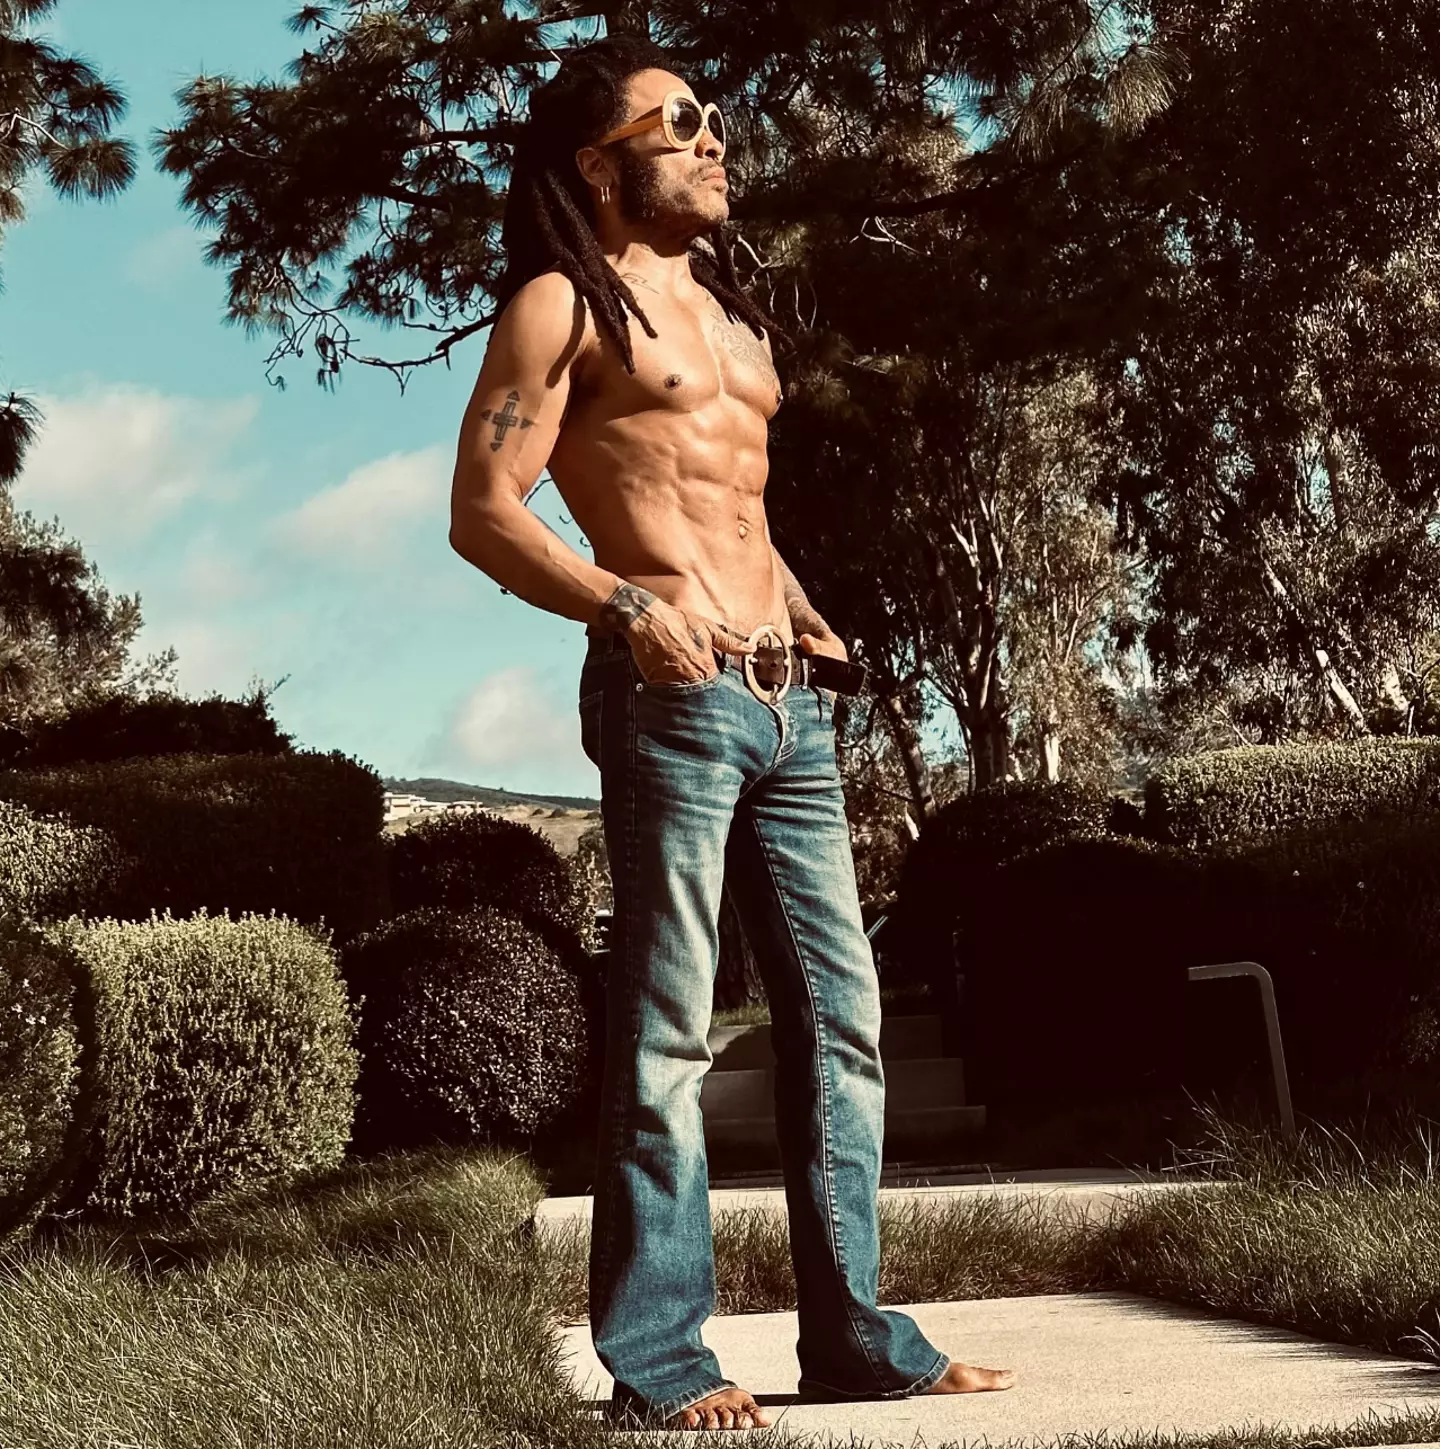 Lenny Kravitz, 59, shared a shirtless snap to Instagram over the weekend.